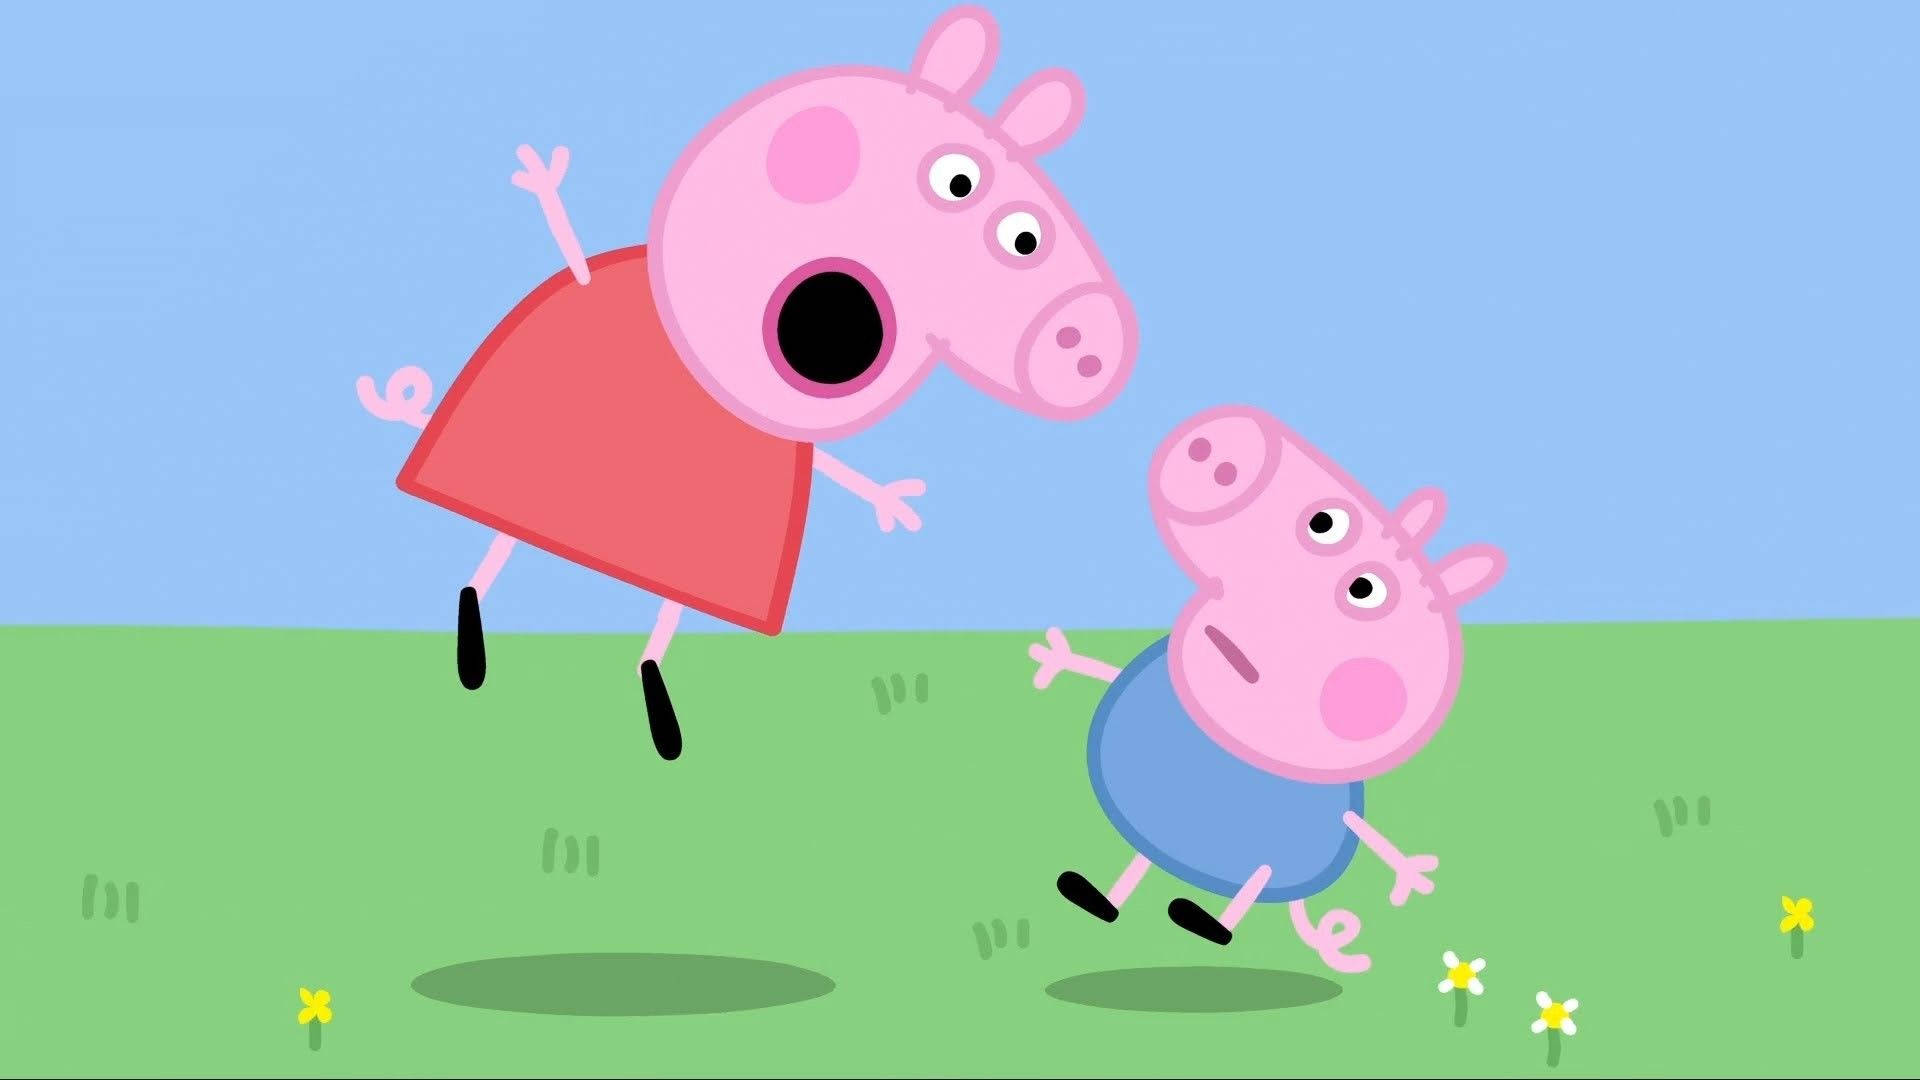 Peppa Pig screaming and scaring George wallpaper.